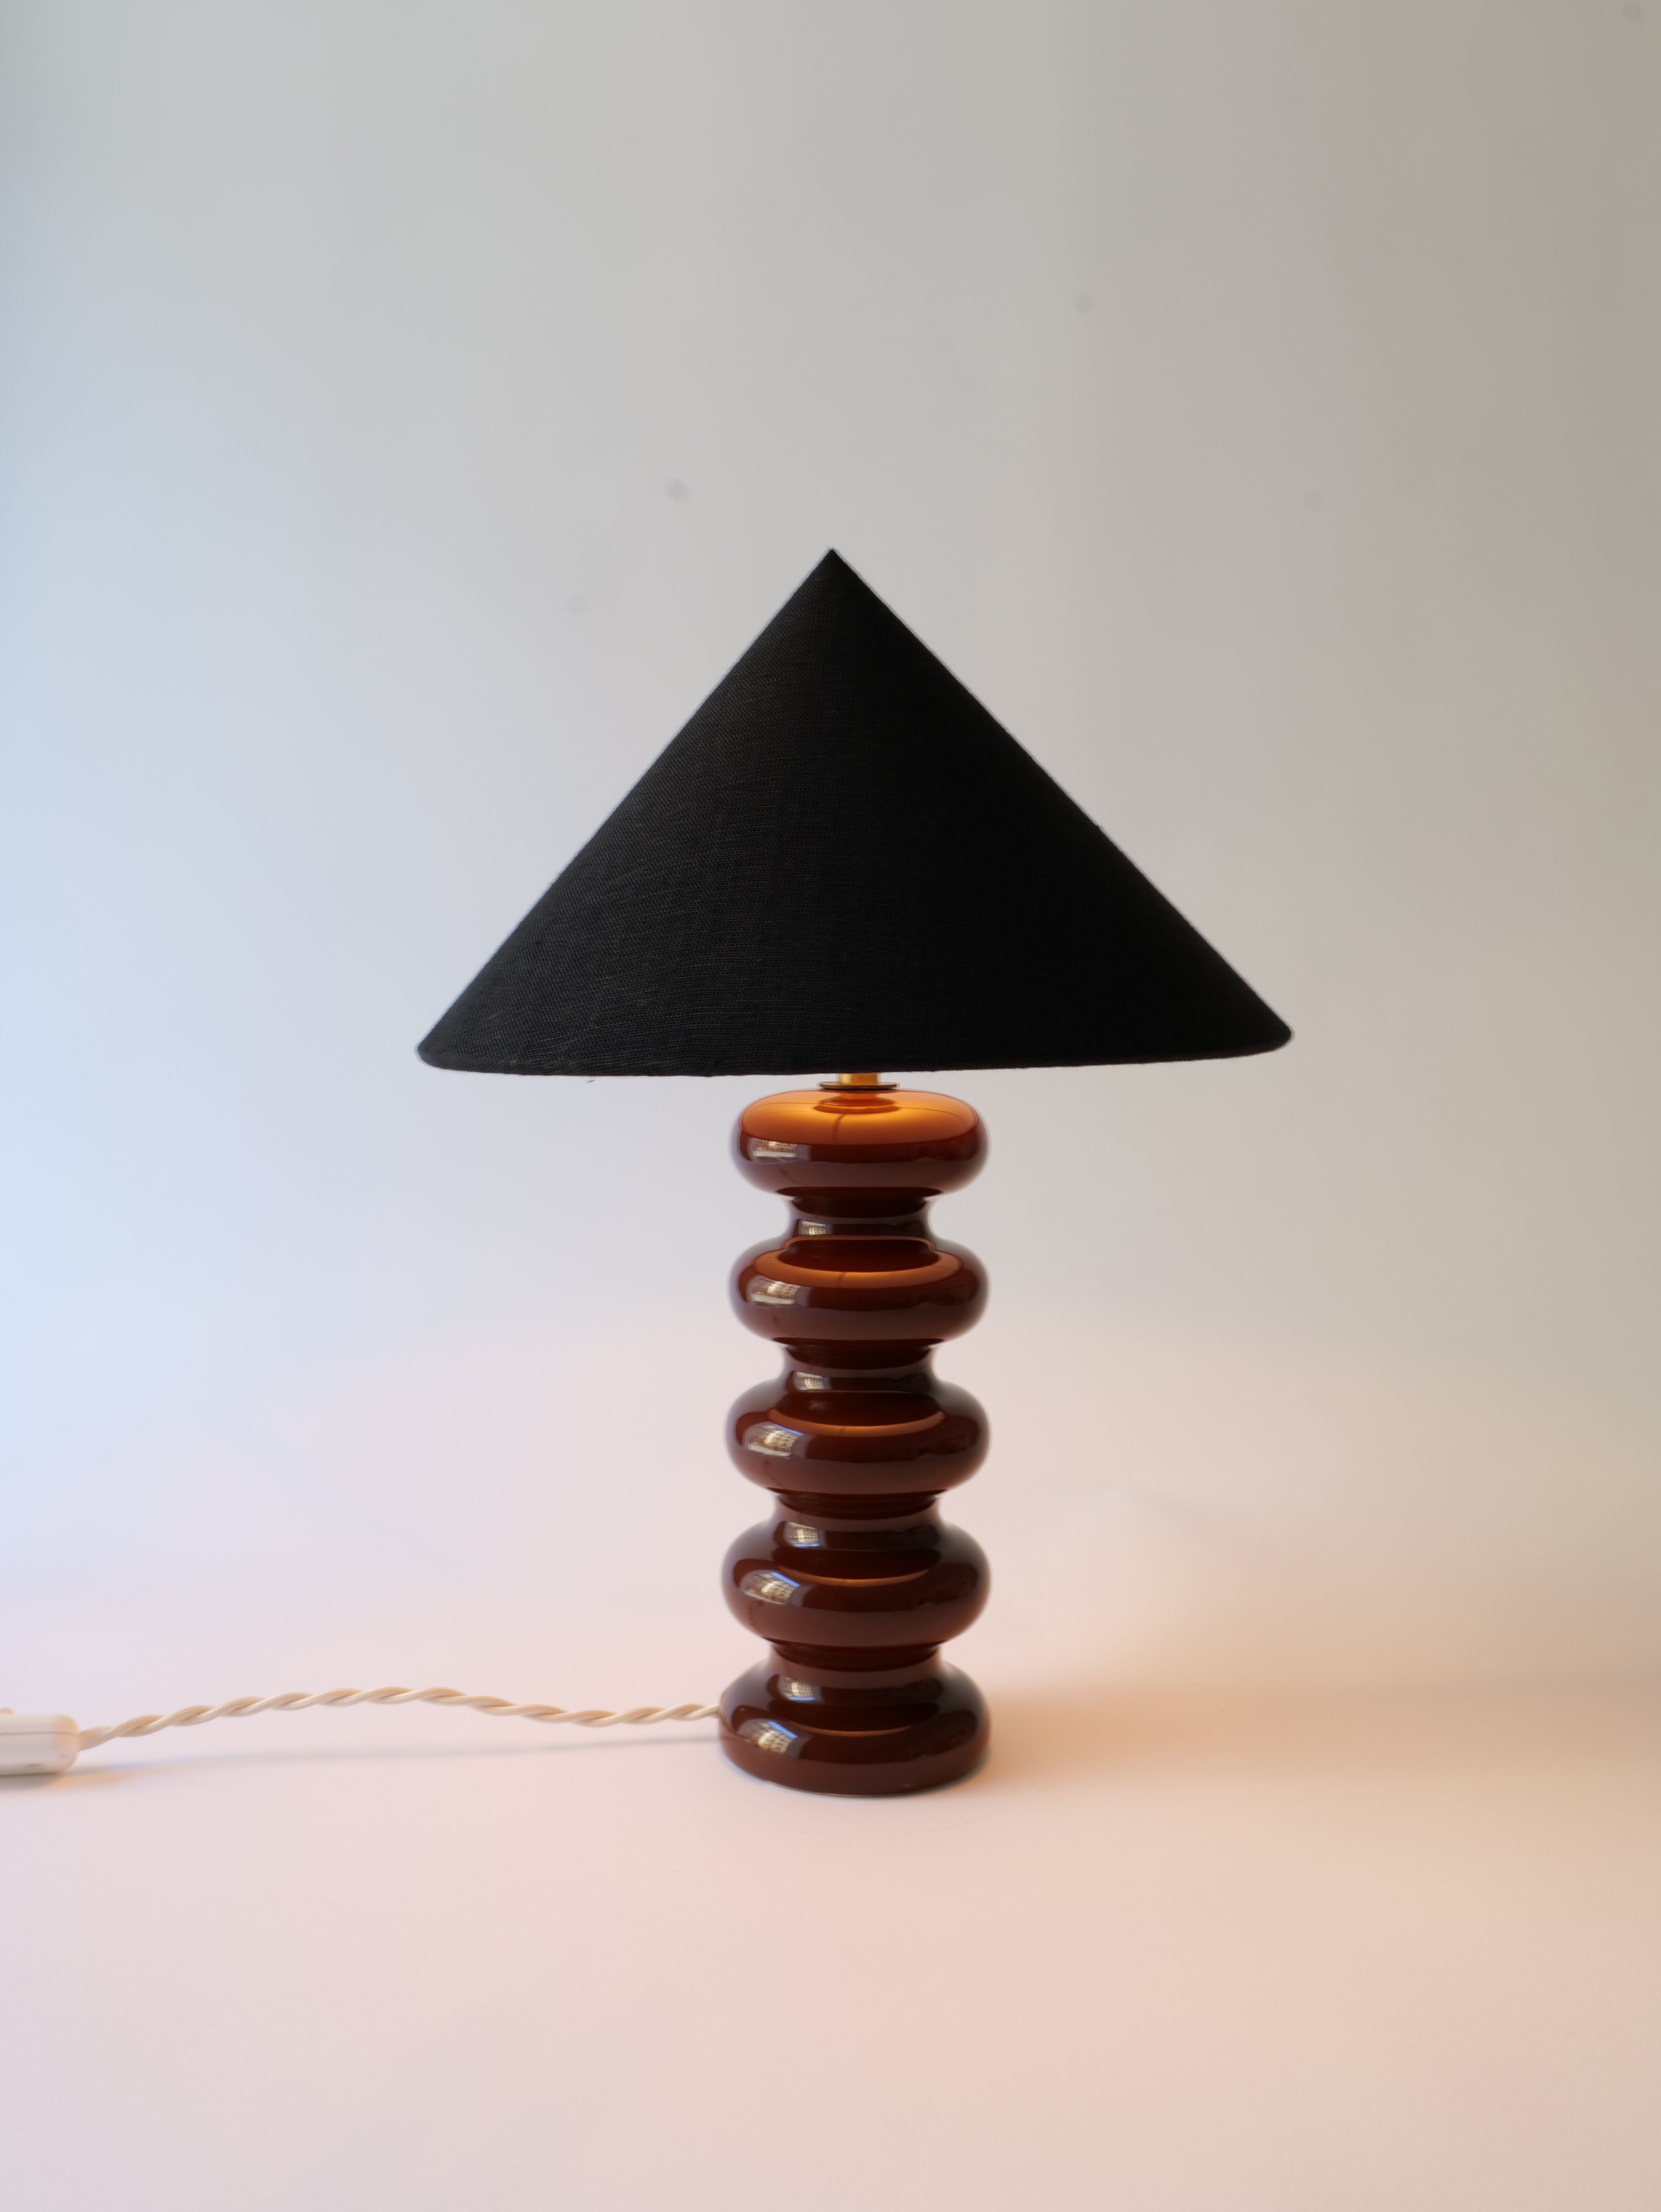 A modern Sculptural Ceramic Lamp from the Collection apart featuring a stack of glossy, brown, circular ceramic stones as its base, topped with a simple black, triangular lampshade. The lamp is connected to a white power.